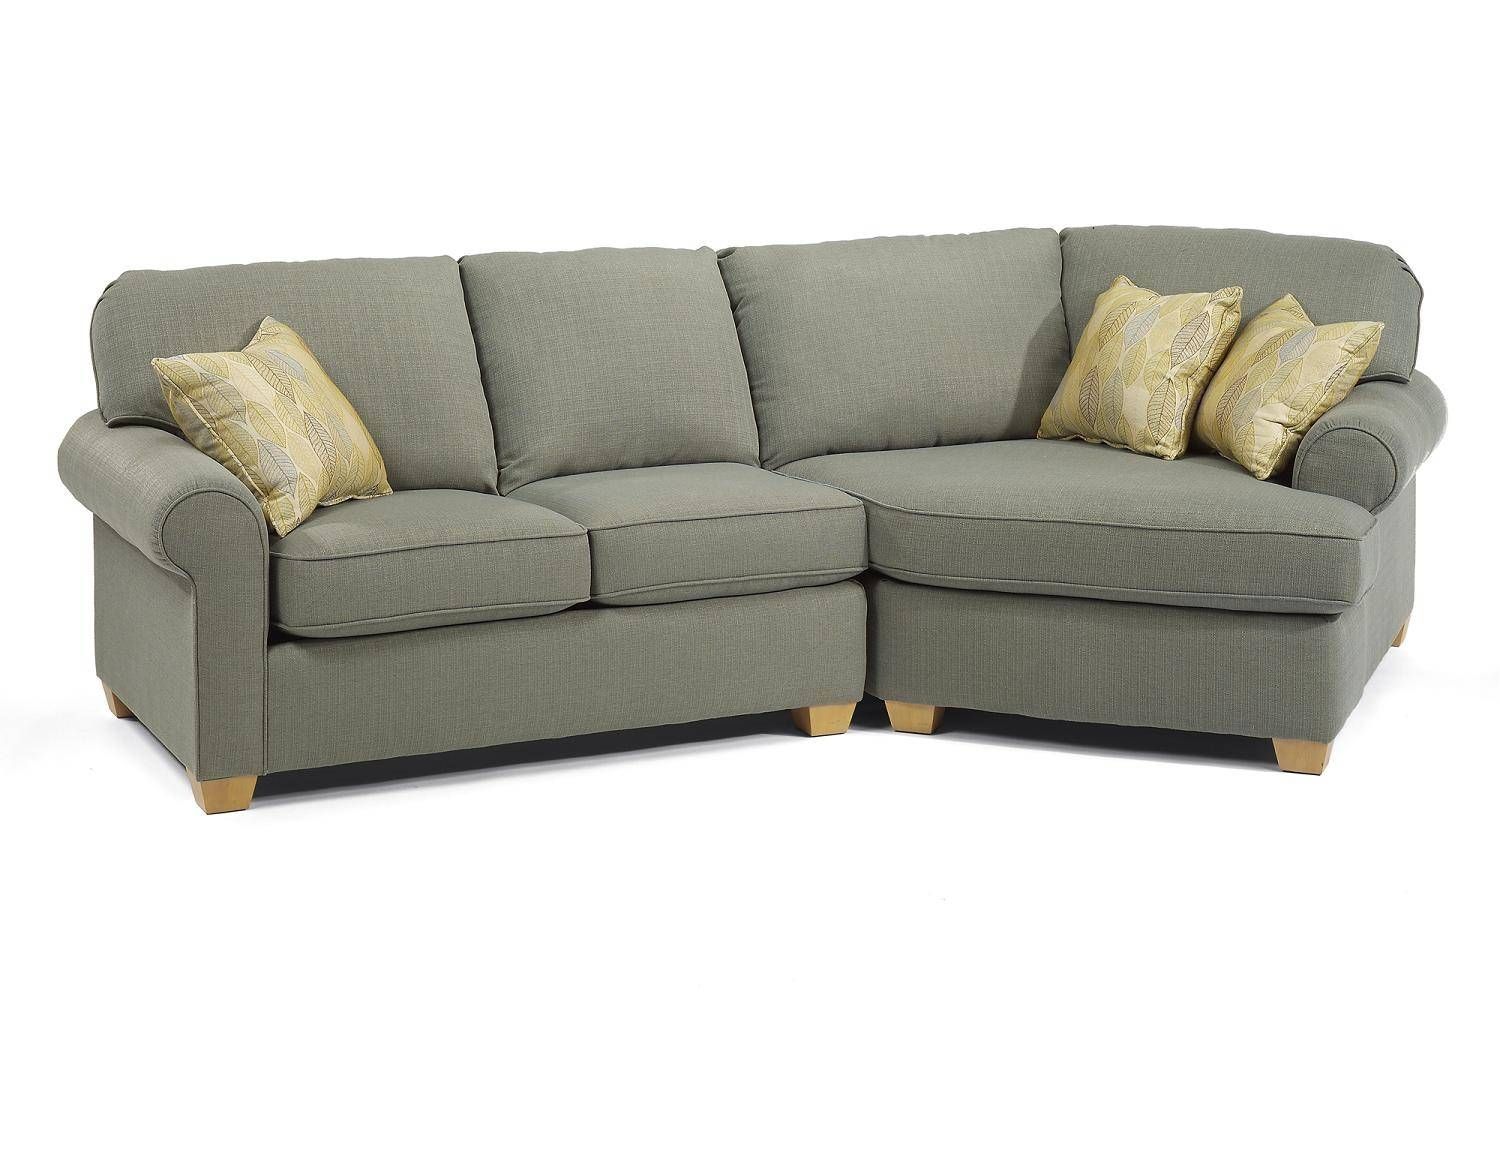 Angled Chaise Sofa – Plymouth Furniture In Angled Chaise Sofa (View 1 of 30)